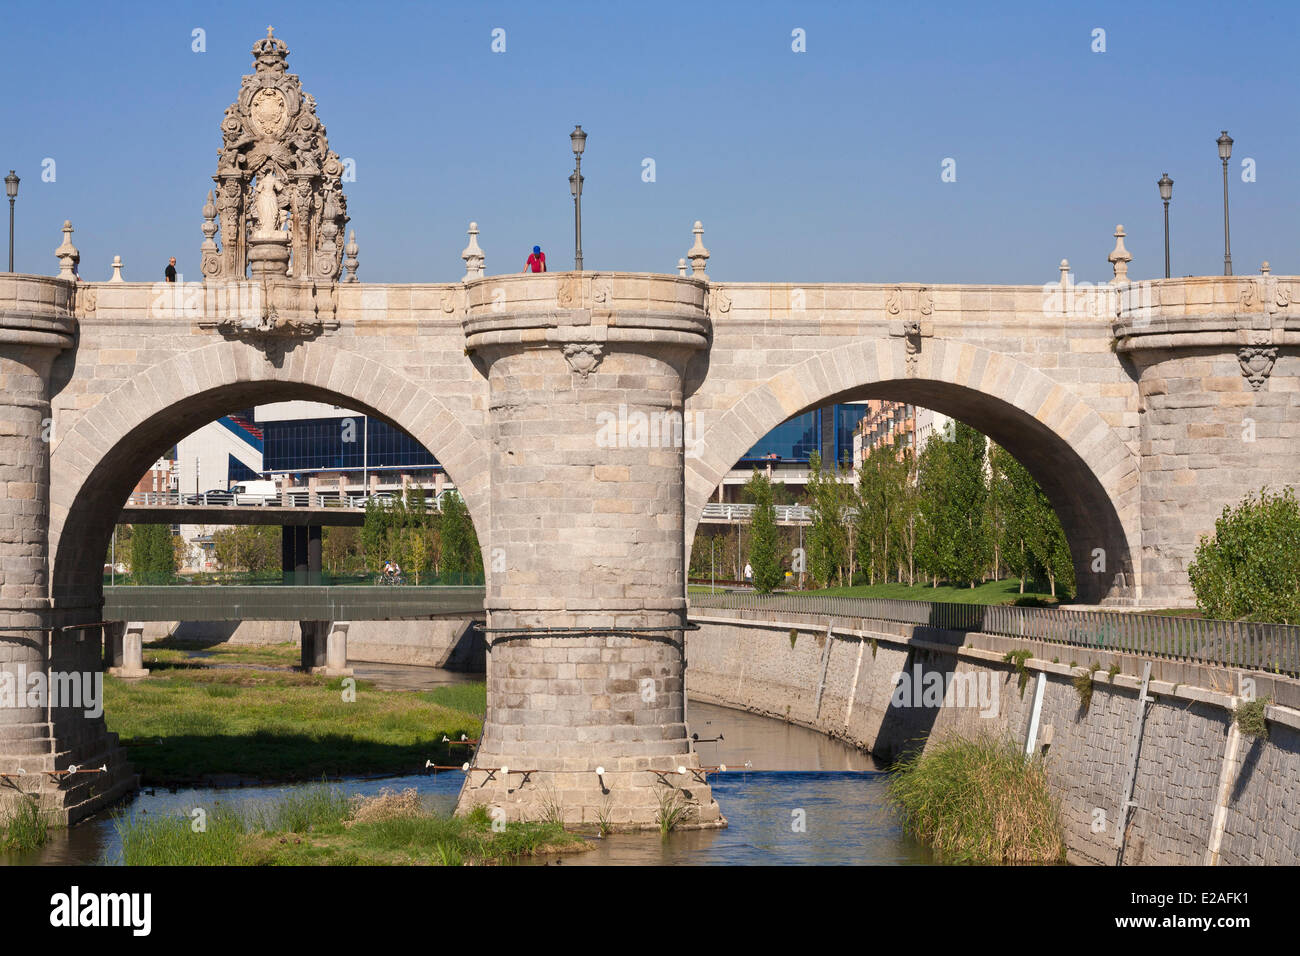 Spain, Madrid, Rio Madrid park along Manzanares river opened in 2011, Tolede Bridge completed in 1732 with oratories dedicated Stock Photo